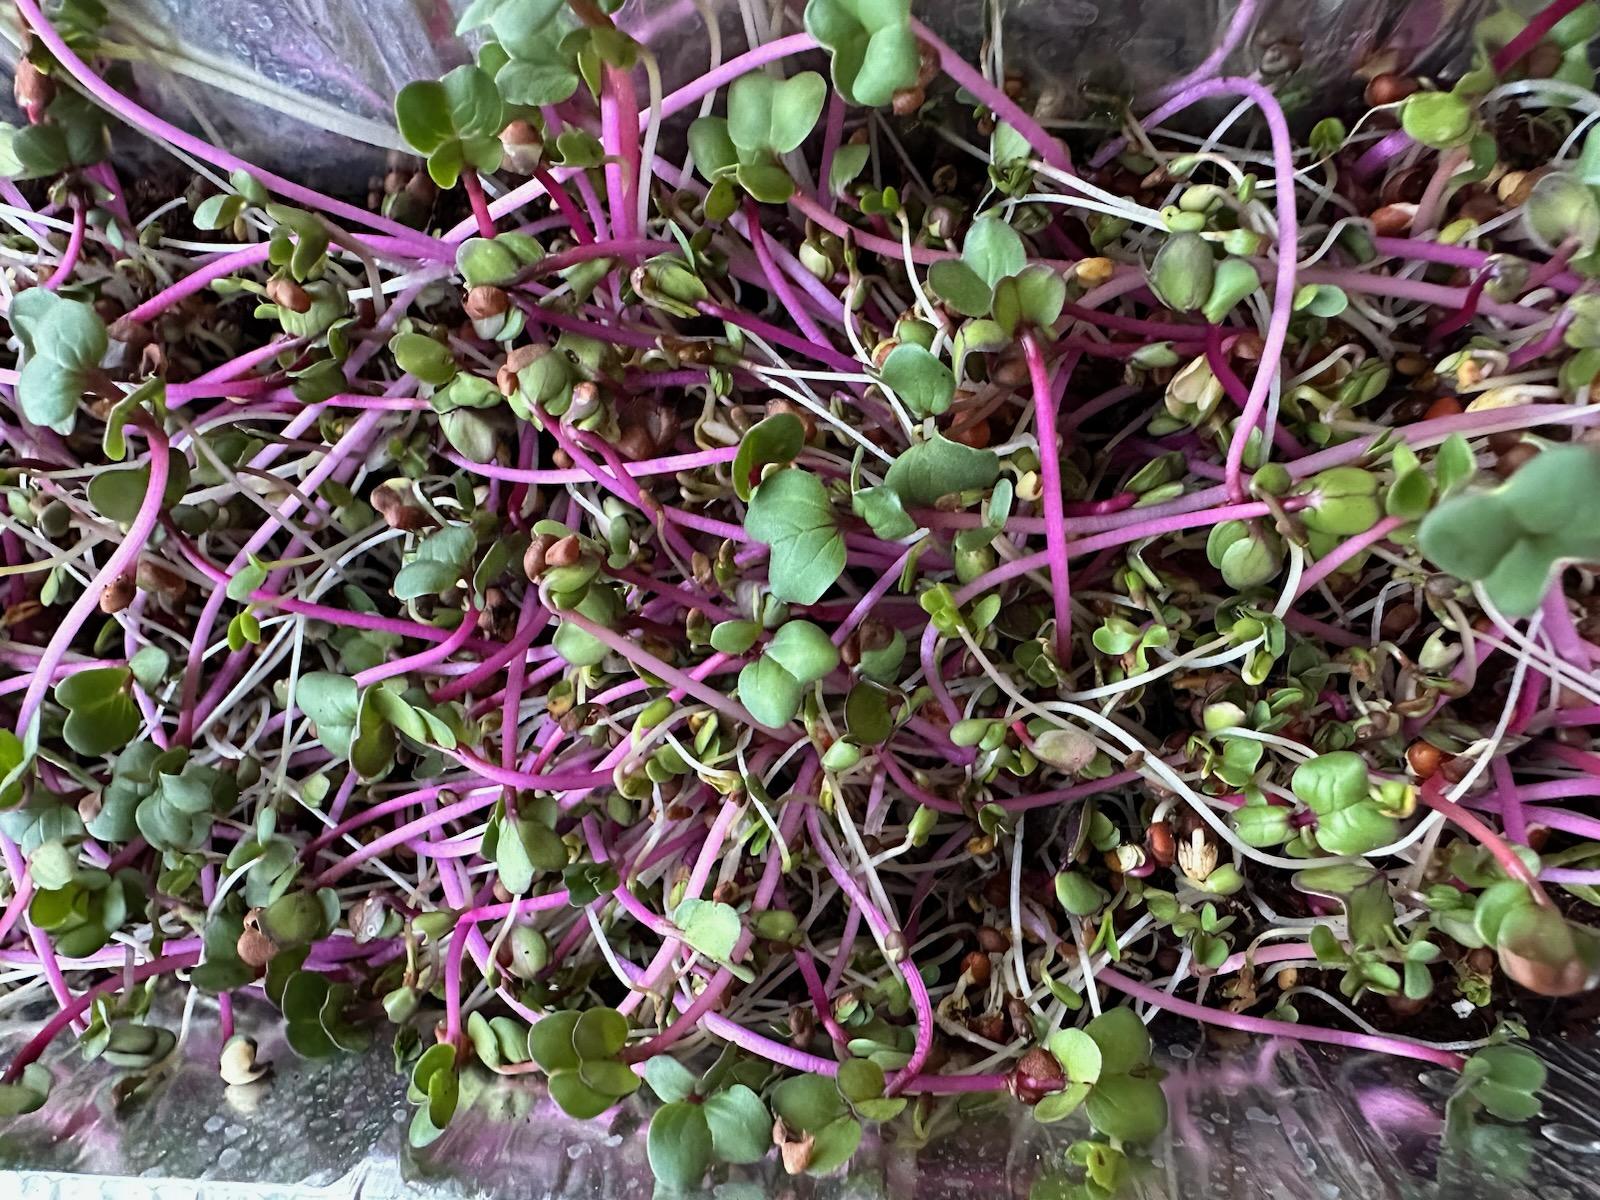 Sprouts Workshop & Houseplants – Saturday February 3